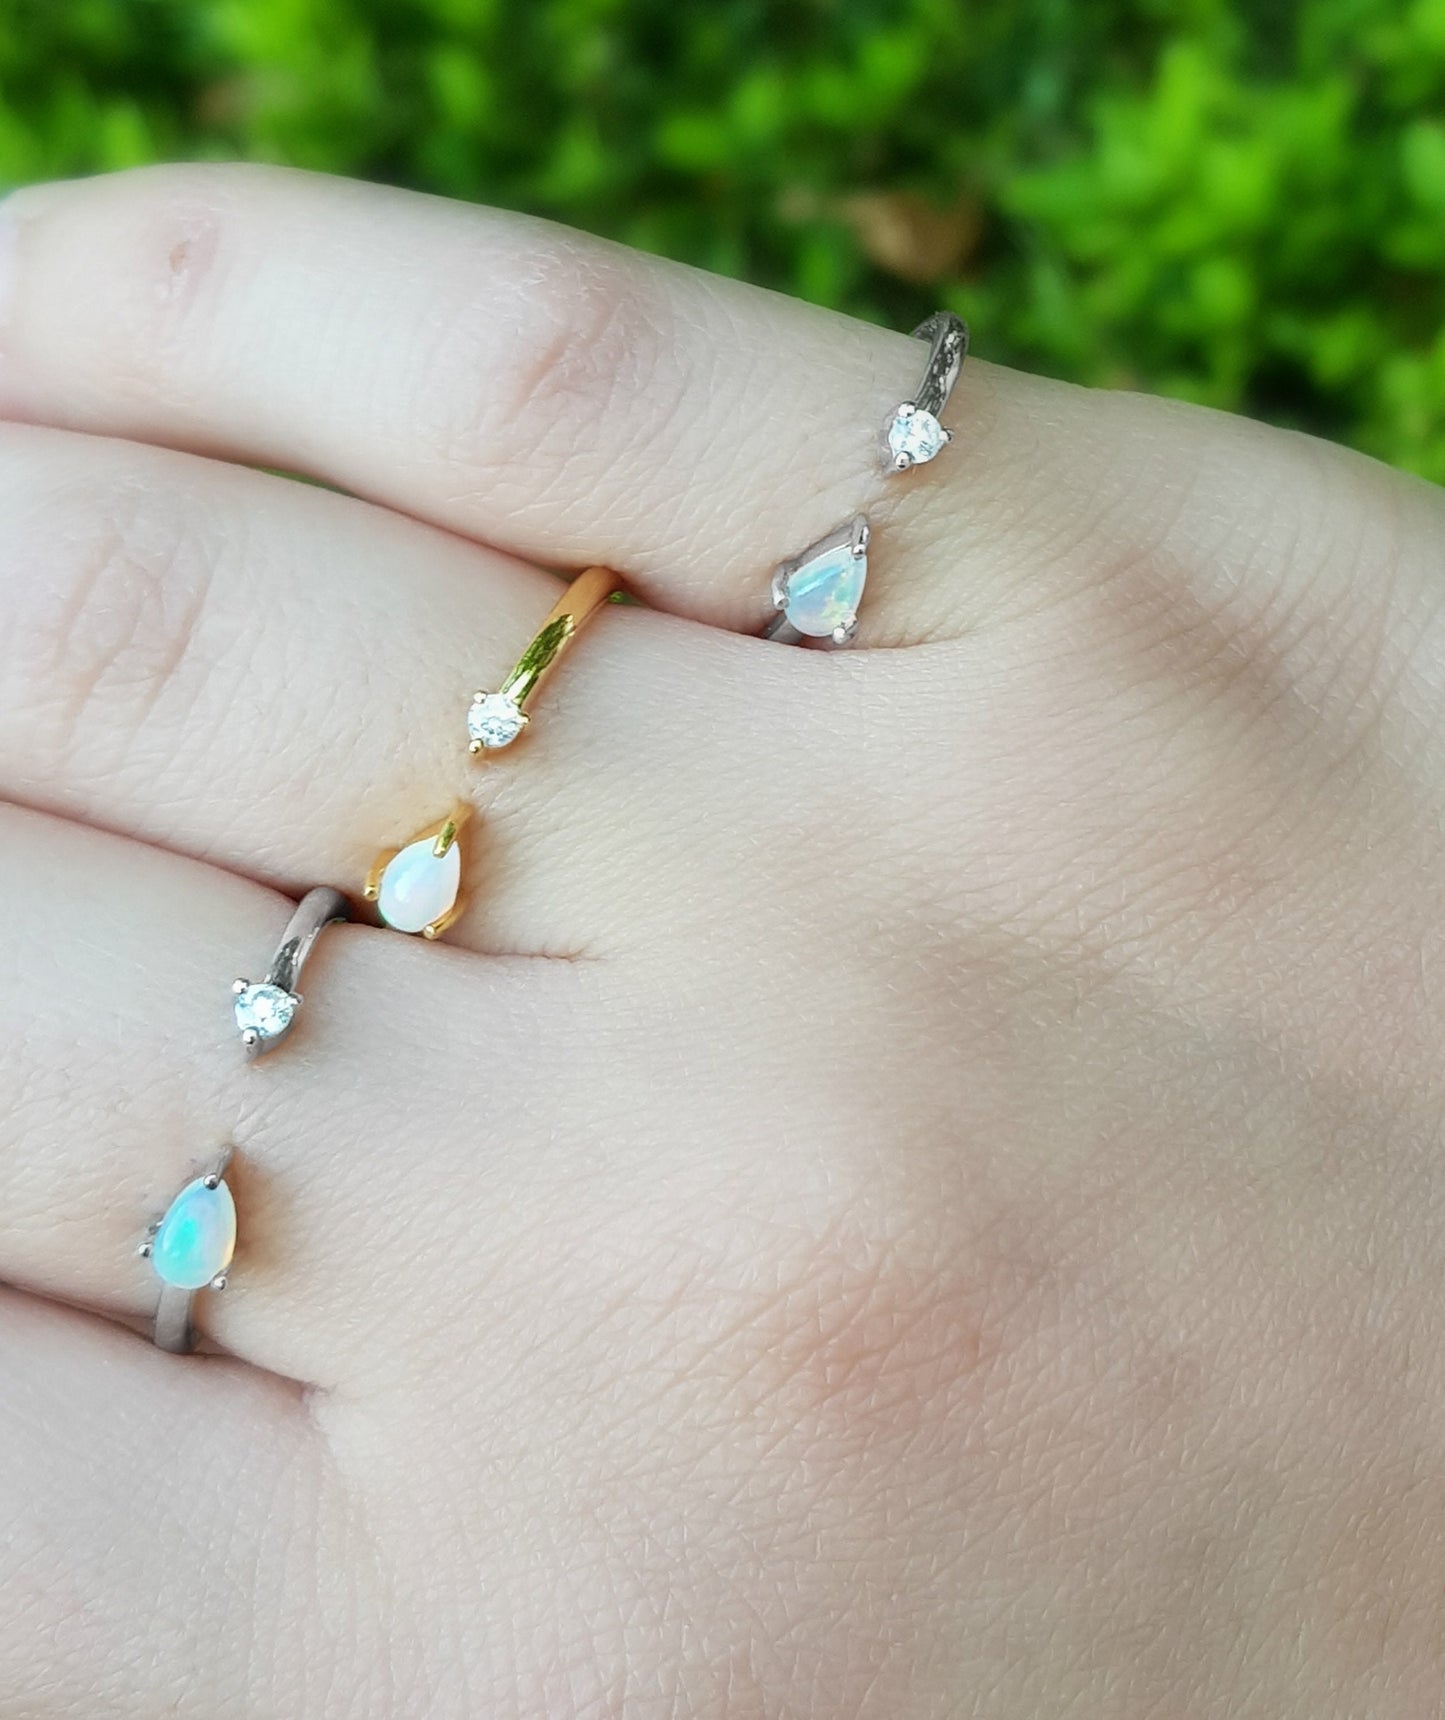 Ethiopian Opal And Zircon Ring Adjustable Gemstone Ring Dainty Ring Sterling Silver Or Gold Plated Minimal Ring Stacking Ring Unique Gift